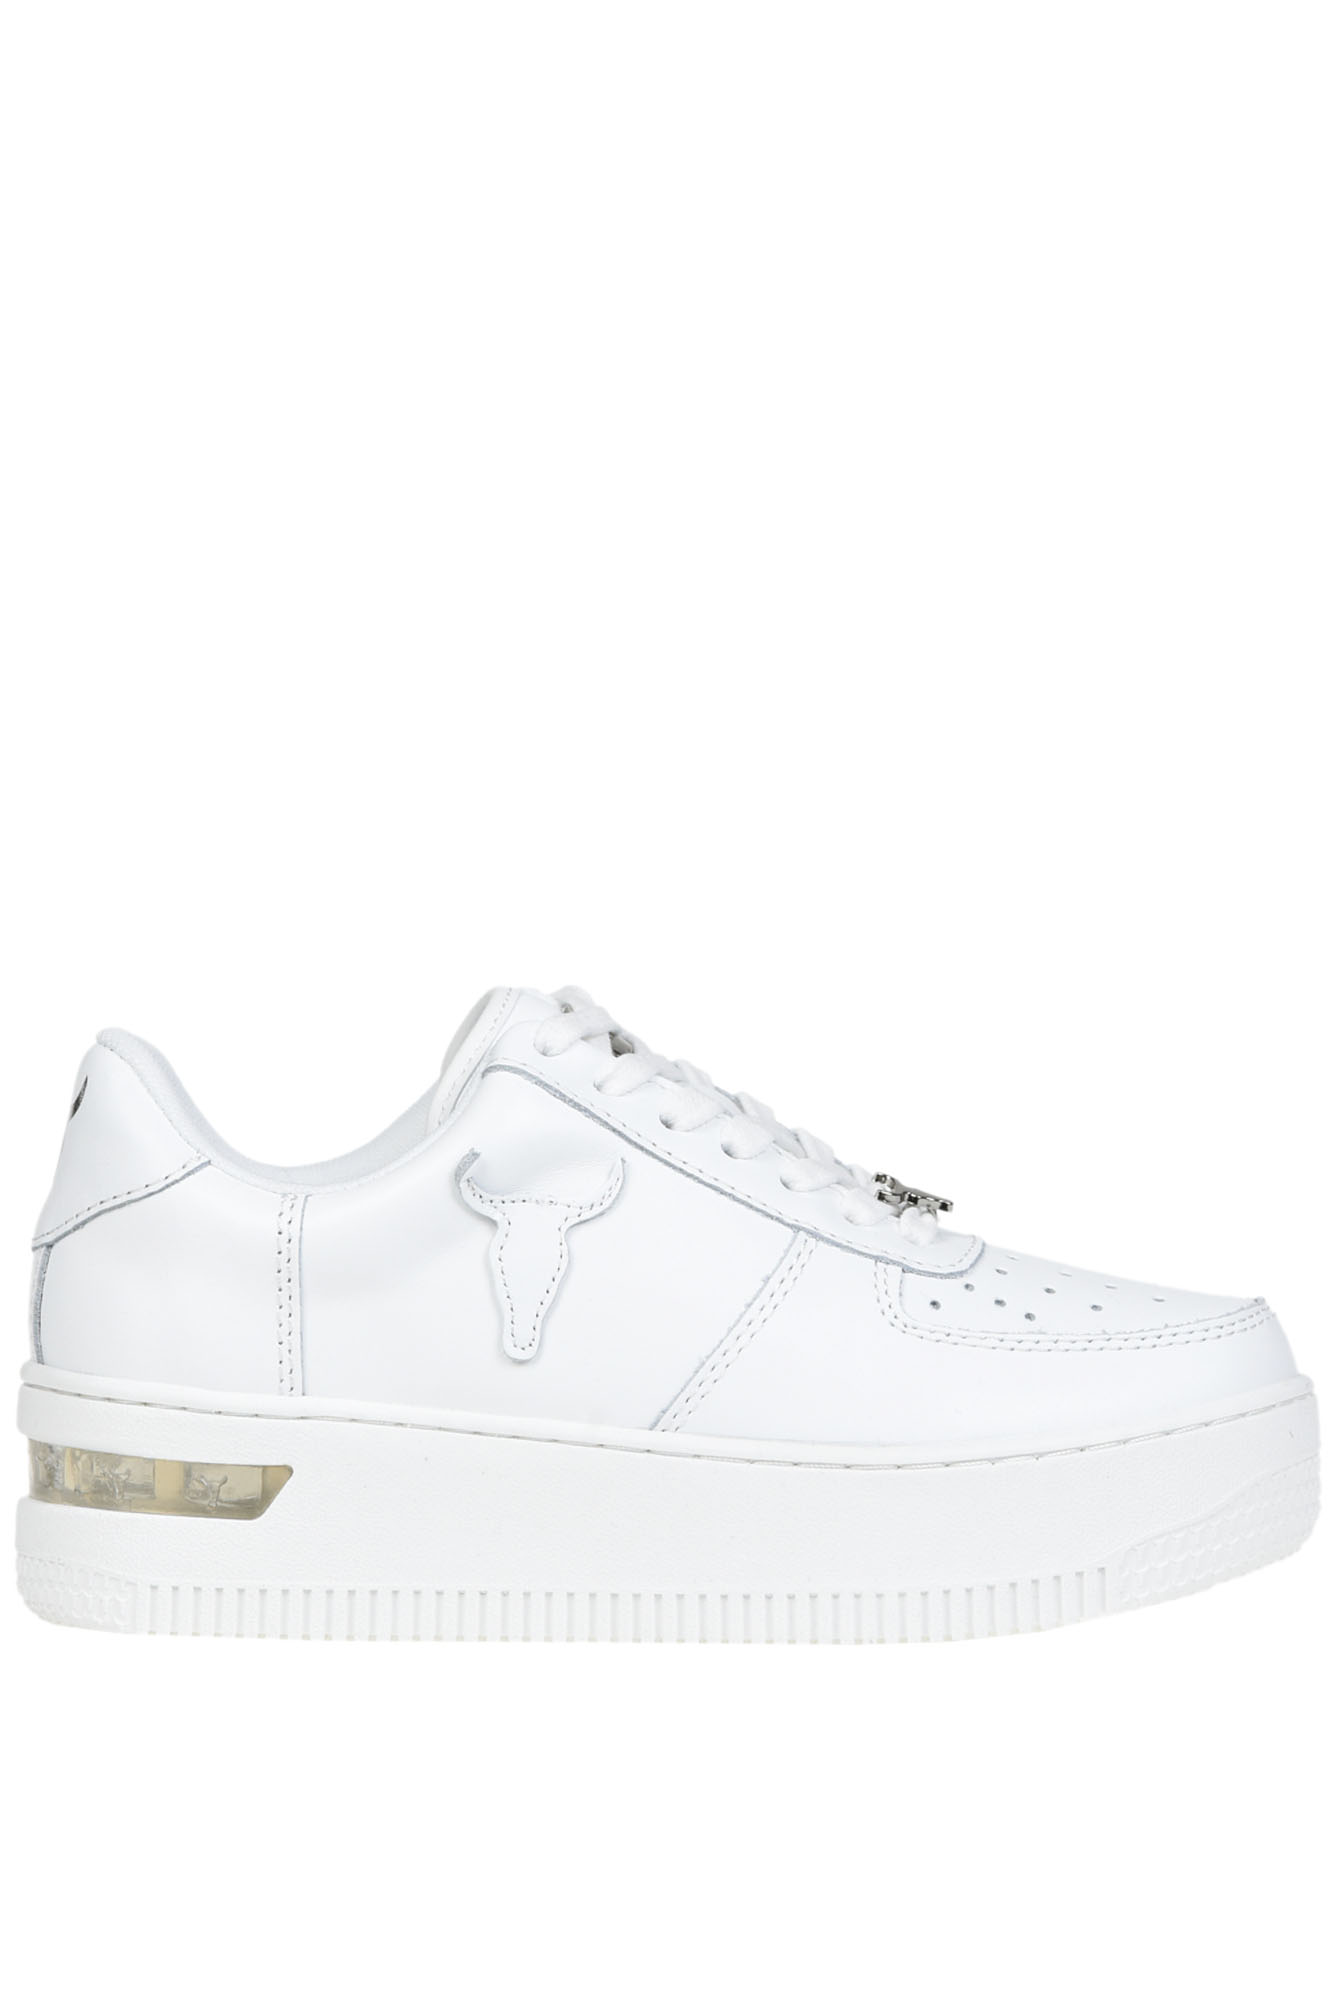 Windsor Smith Rhythm Sneakers In White